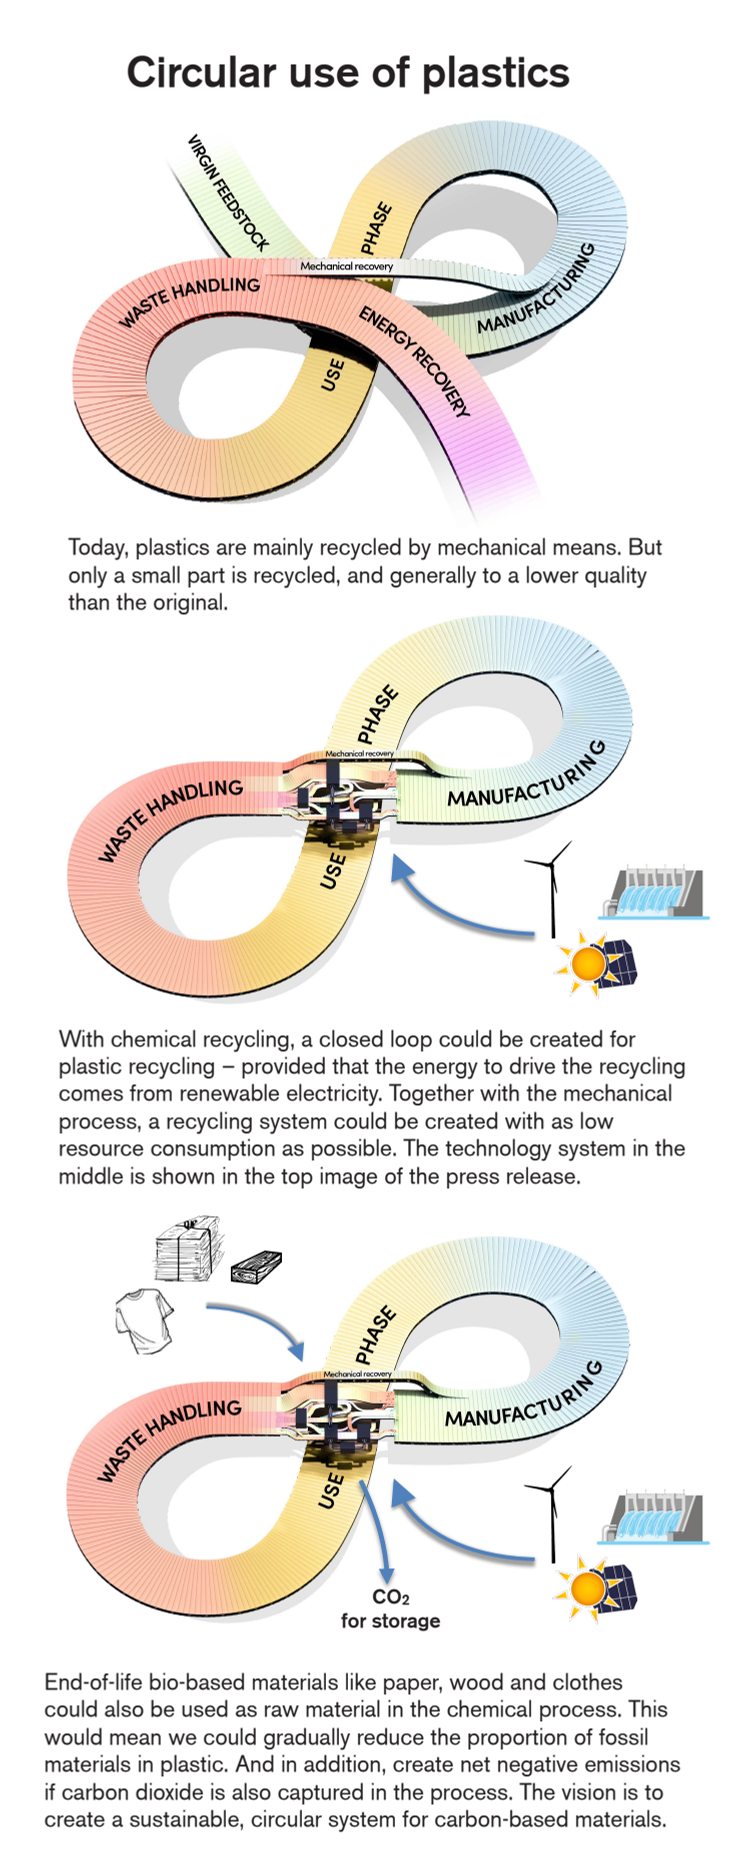 Graphic summary of today’s and tomorrow’s recycling system for plastics (PDF version)